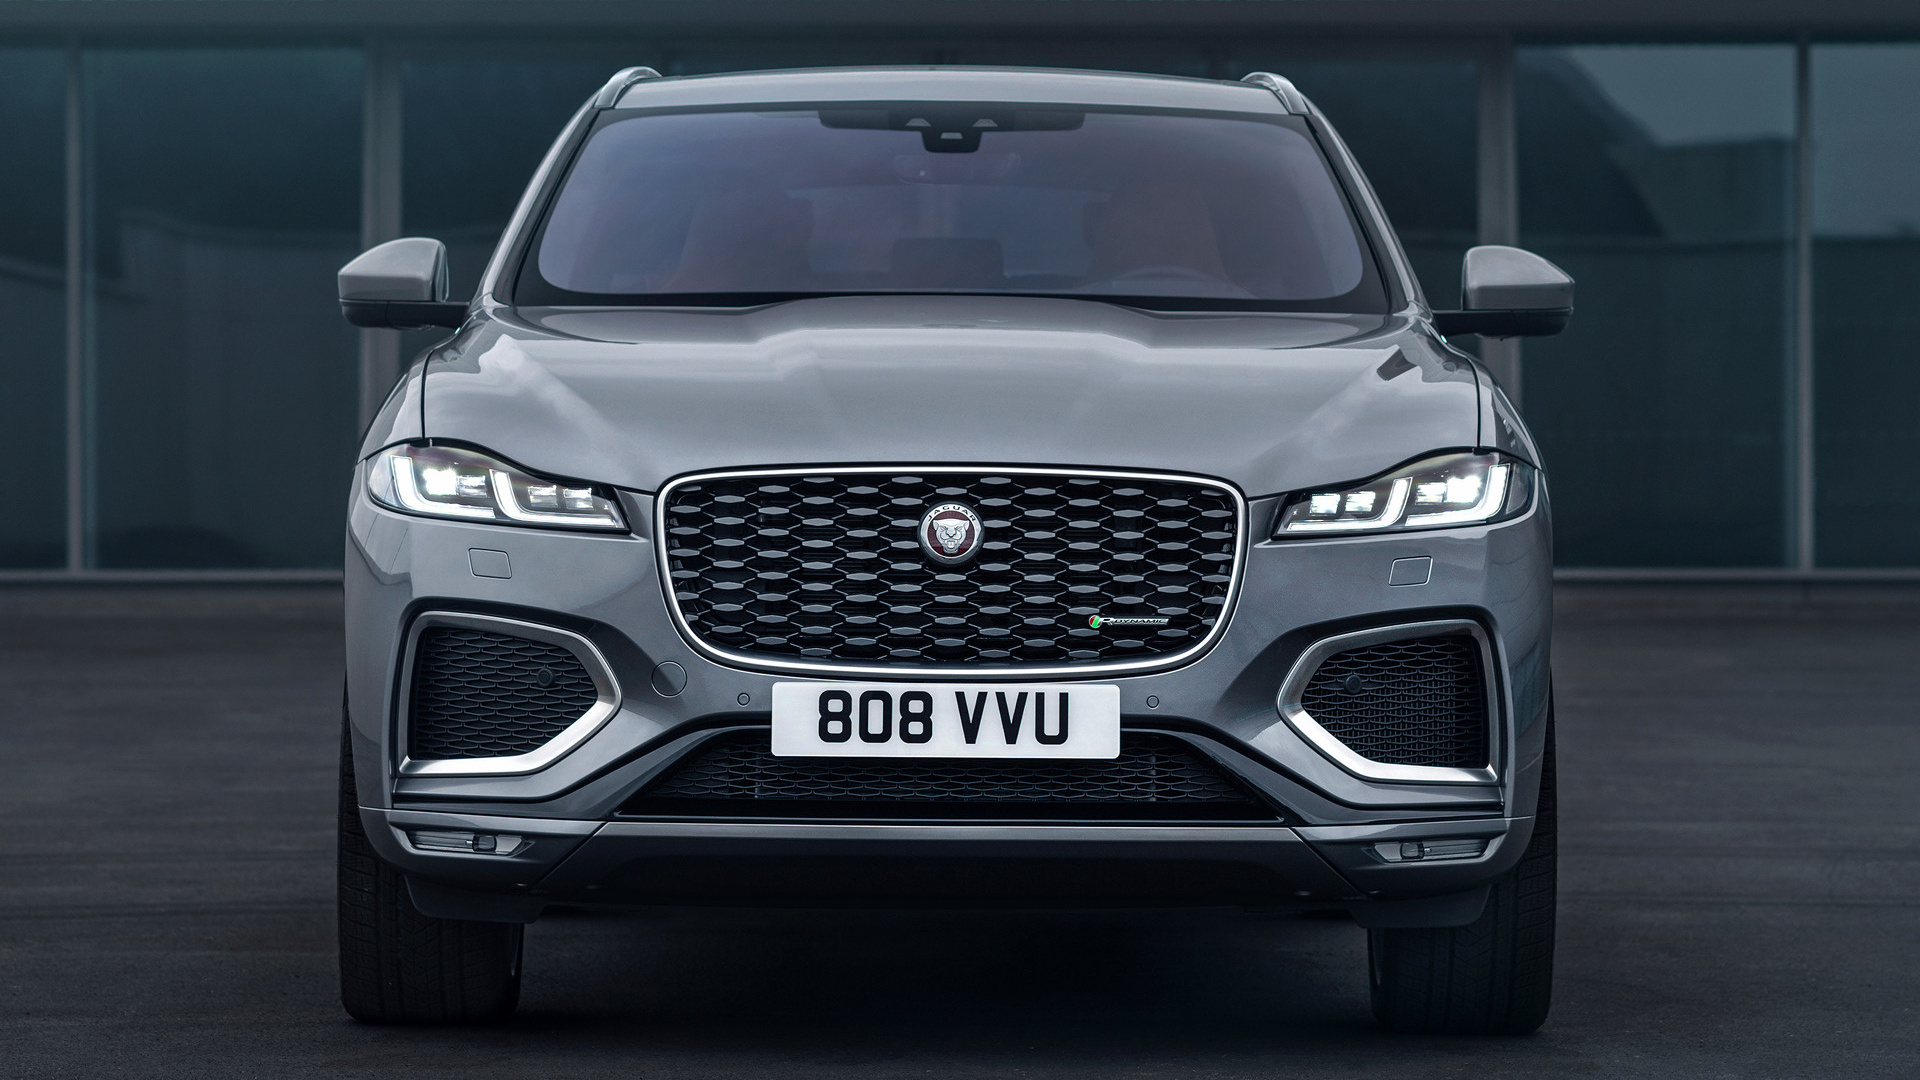 2020 Jaguar F-Pace R-Dynamic - Wallpapers and HD Images ...